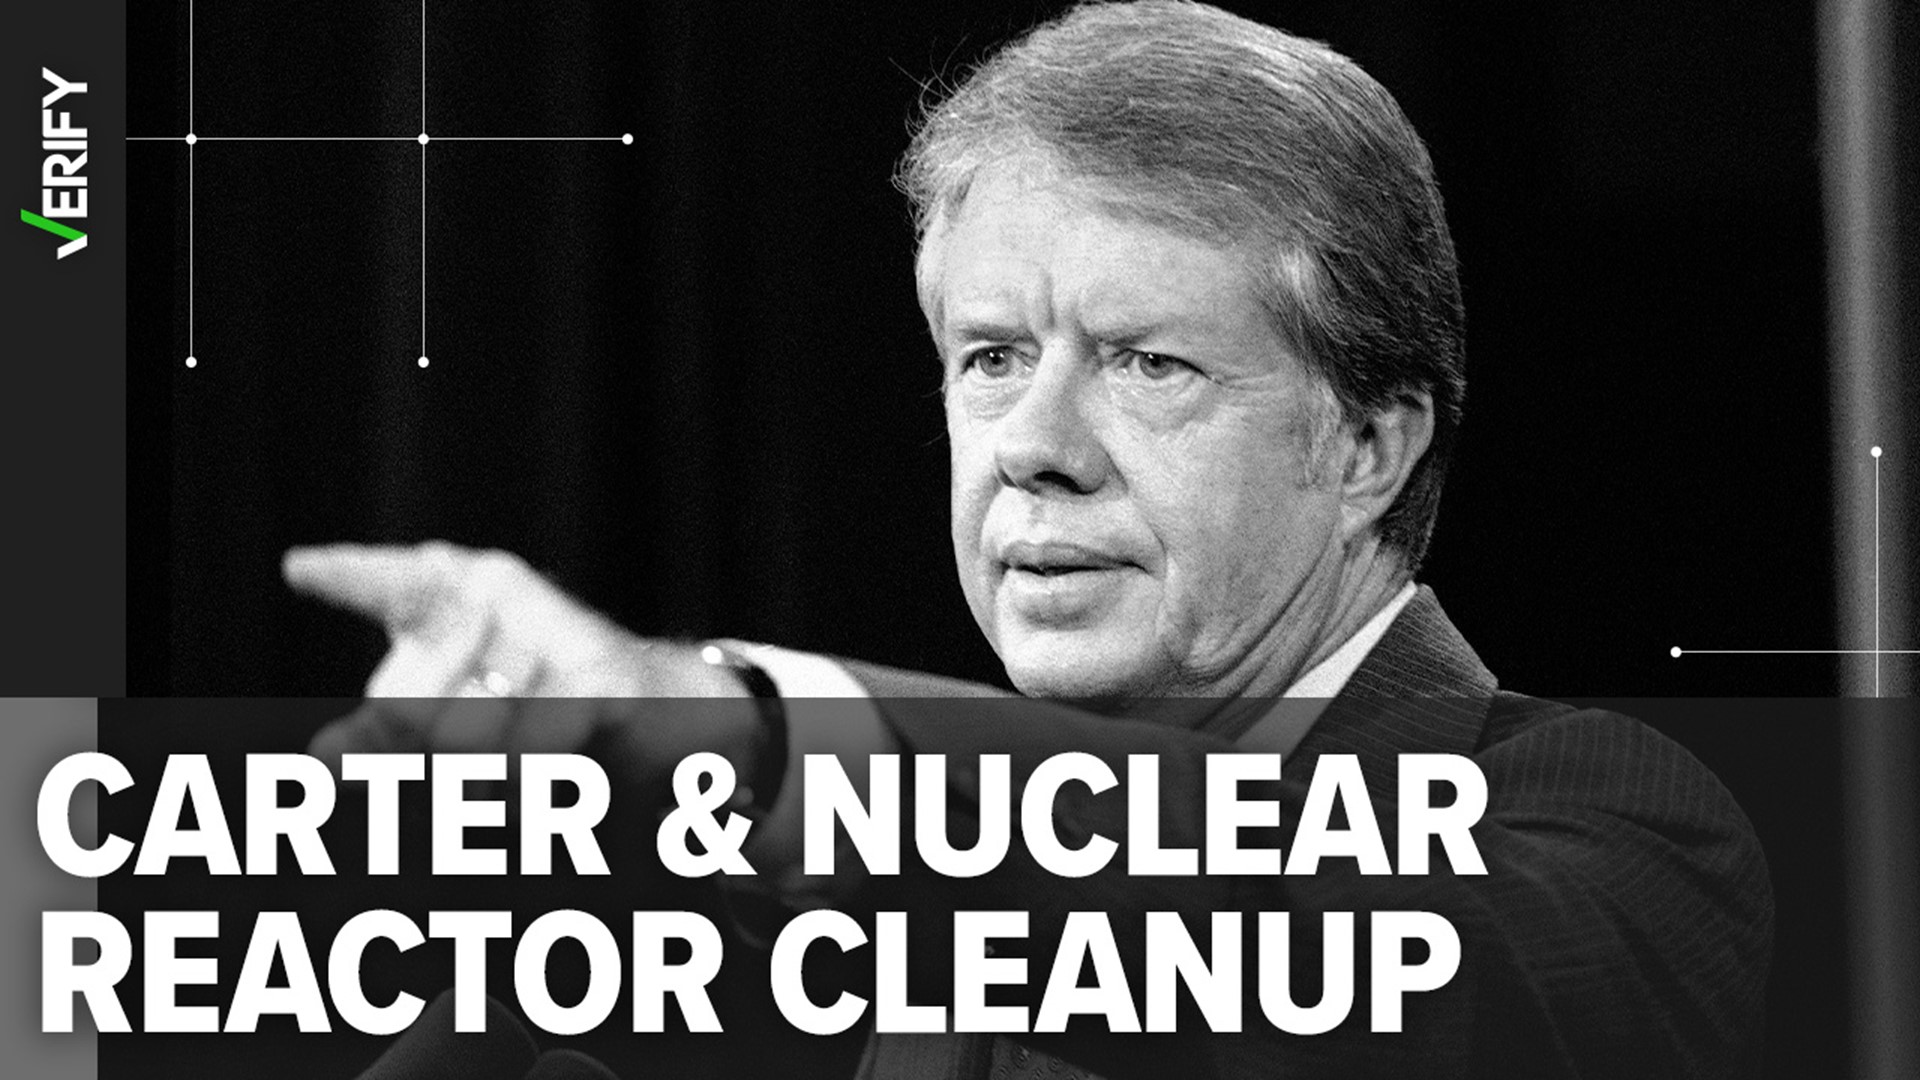 In 1952, a nuclear reactor partially melted down in Canada. Then-U.S. Navy Lt. Jimmy Carter led a team of men to help with cleanup efforts.